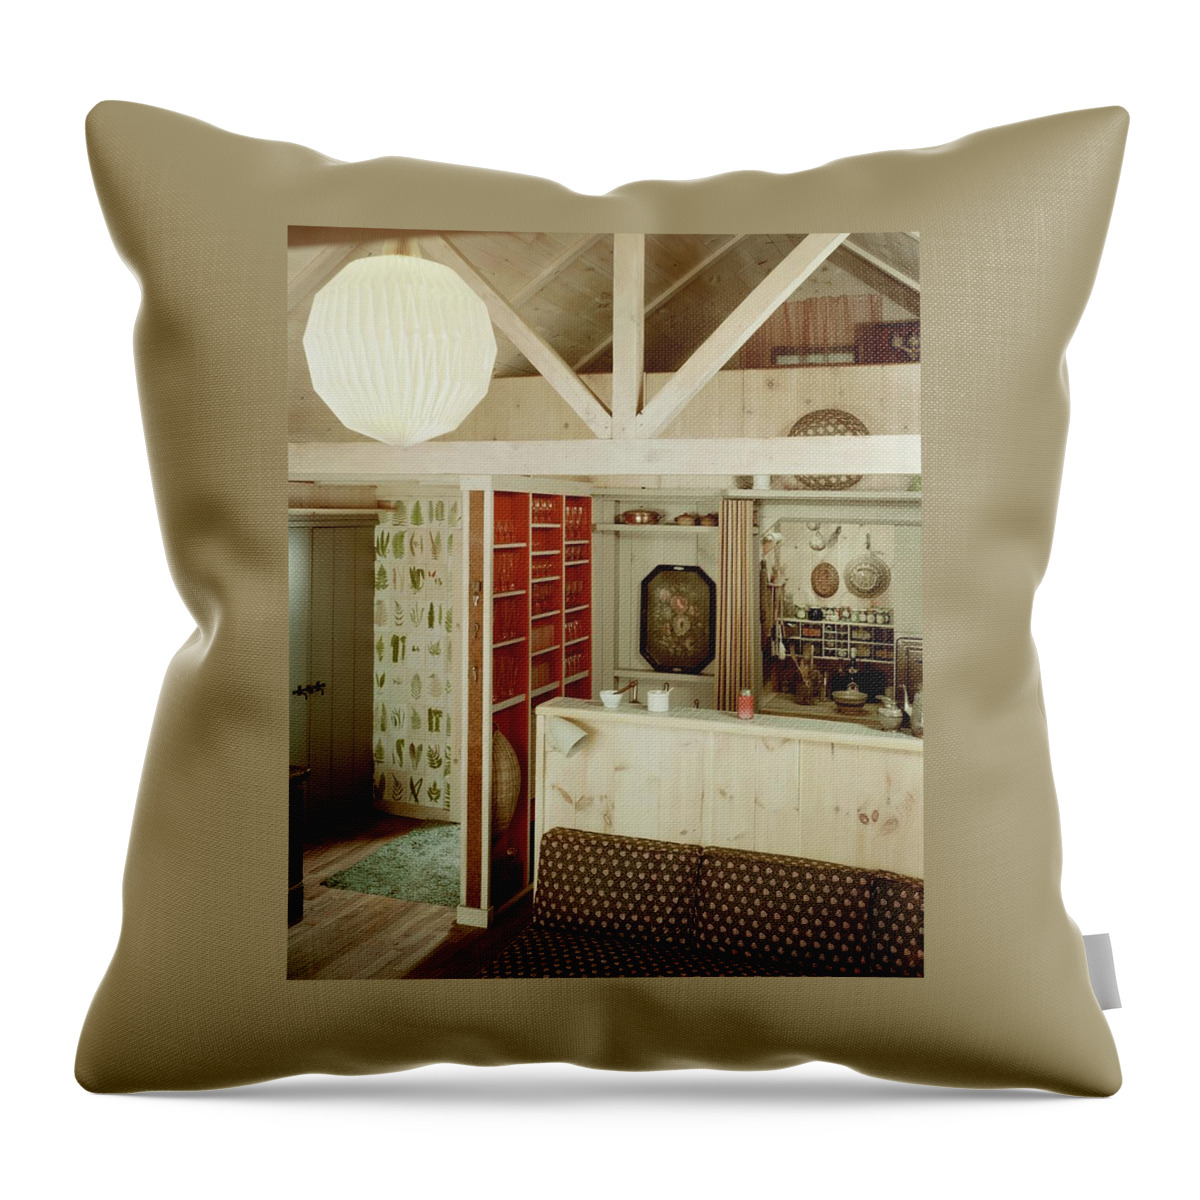 A Rustic Kitchen Throw Pillow